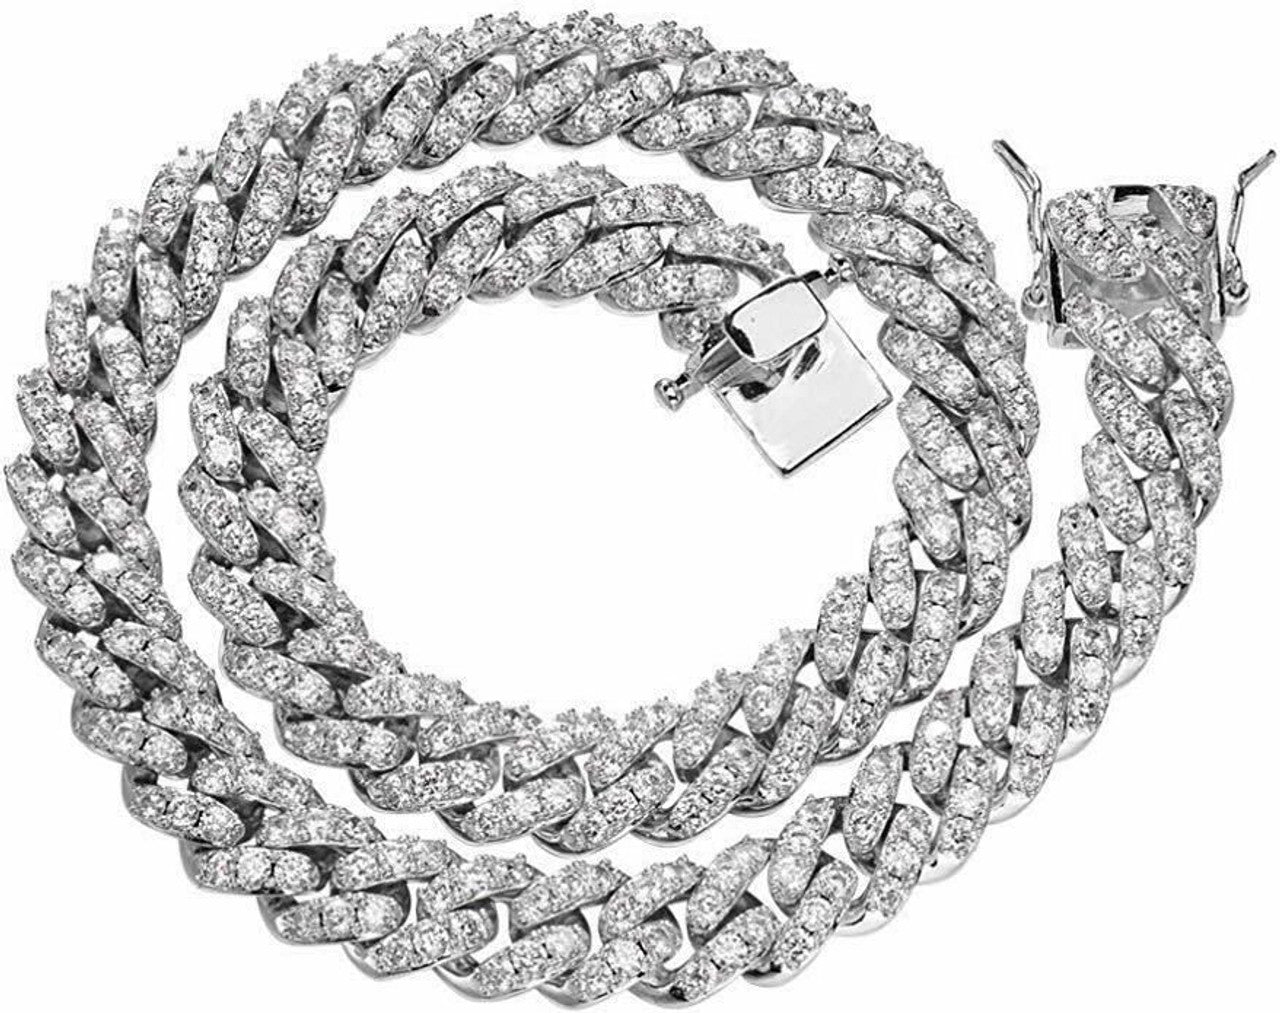 ROSE GOLD Real Mens Miami Cuban Chain Solid 925 Silver Iced Necklace VERY HEAVY Link 12mm